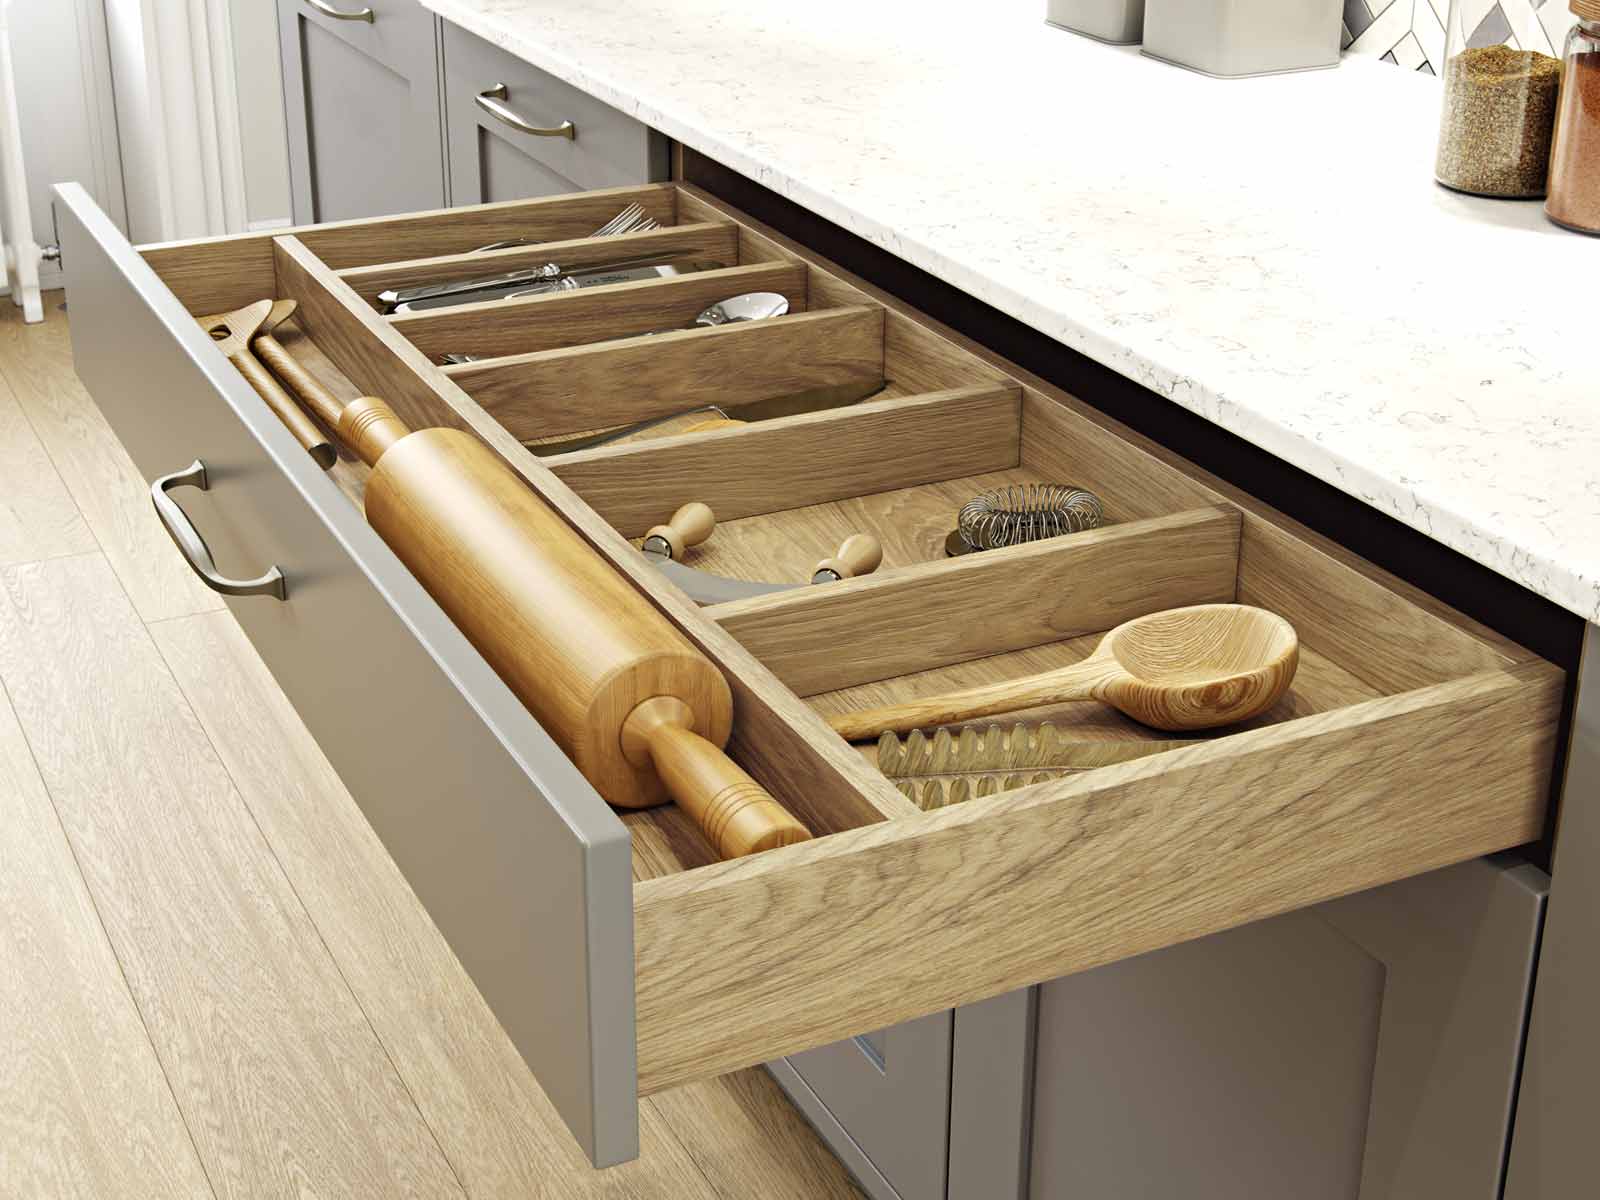 Country rustic farmhouse kitchen wooden kitchen drawers